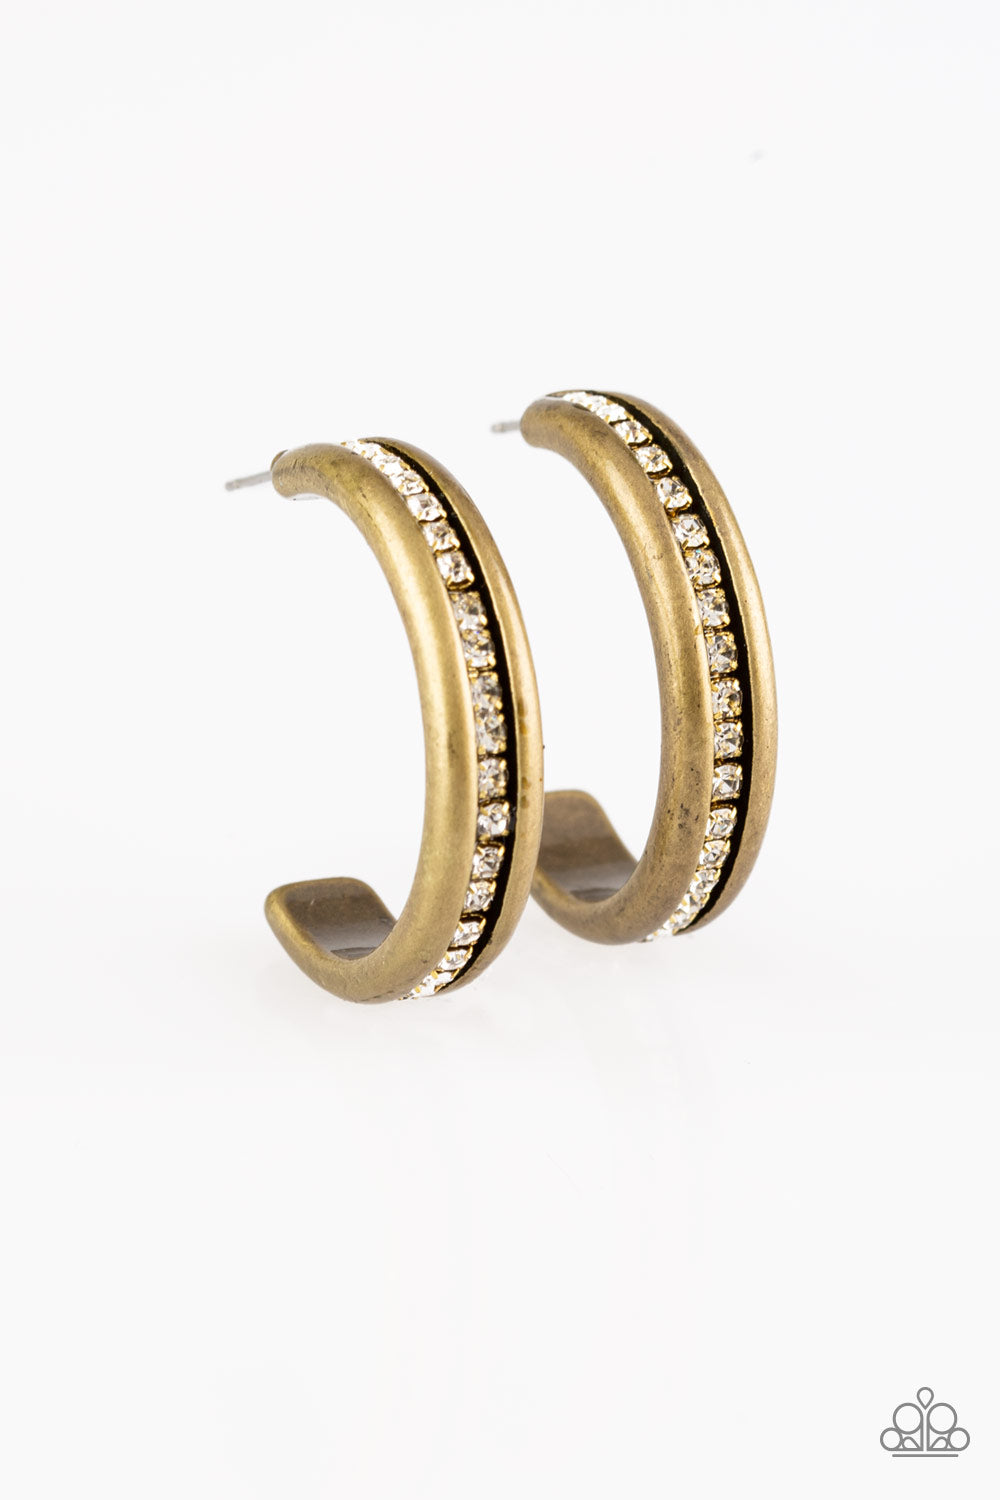 5th Avenue Fashionista - Brass Hoop Earrings - Paparazzi Accessories - A row of glassy white rhinestones is encrusted down the spine of a burnished brass hoop for a refined look. Earring attaches to a standard post fitting. Hoop measures 1 1/4" in diameter. Sold as one pair of hoop earrings.